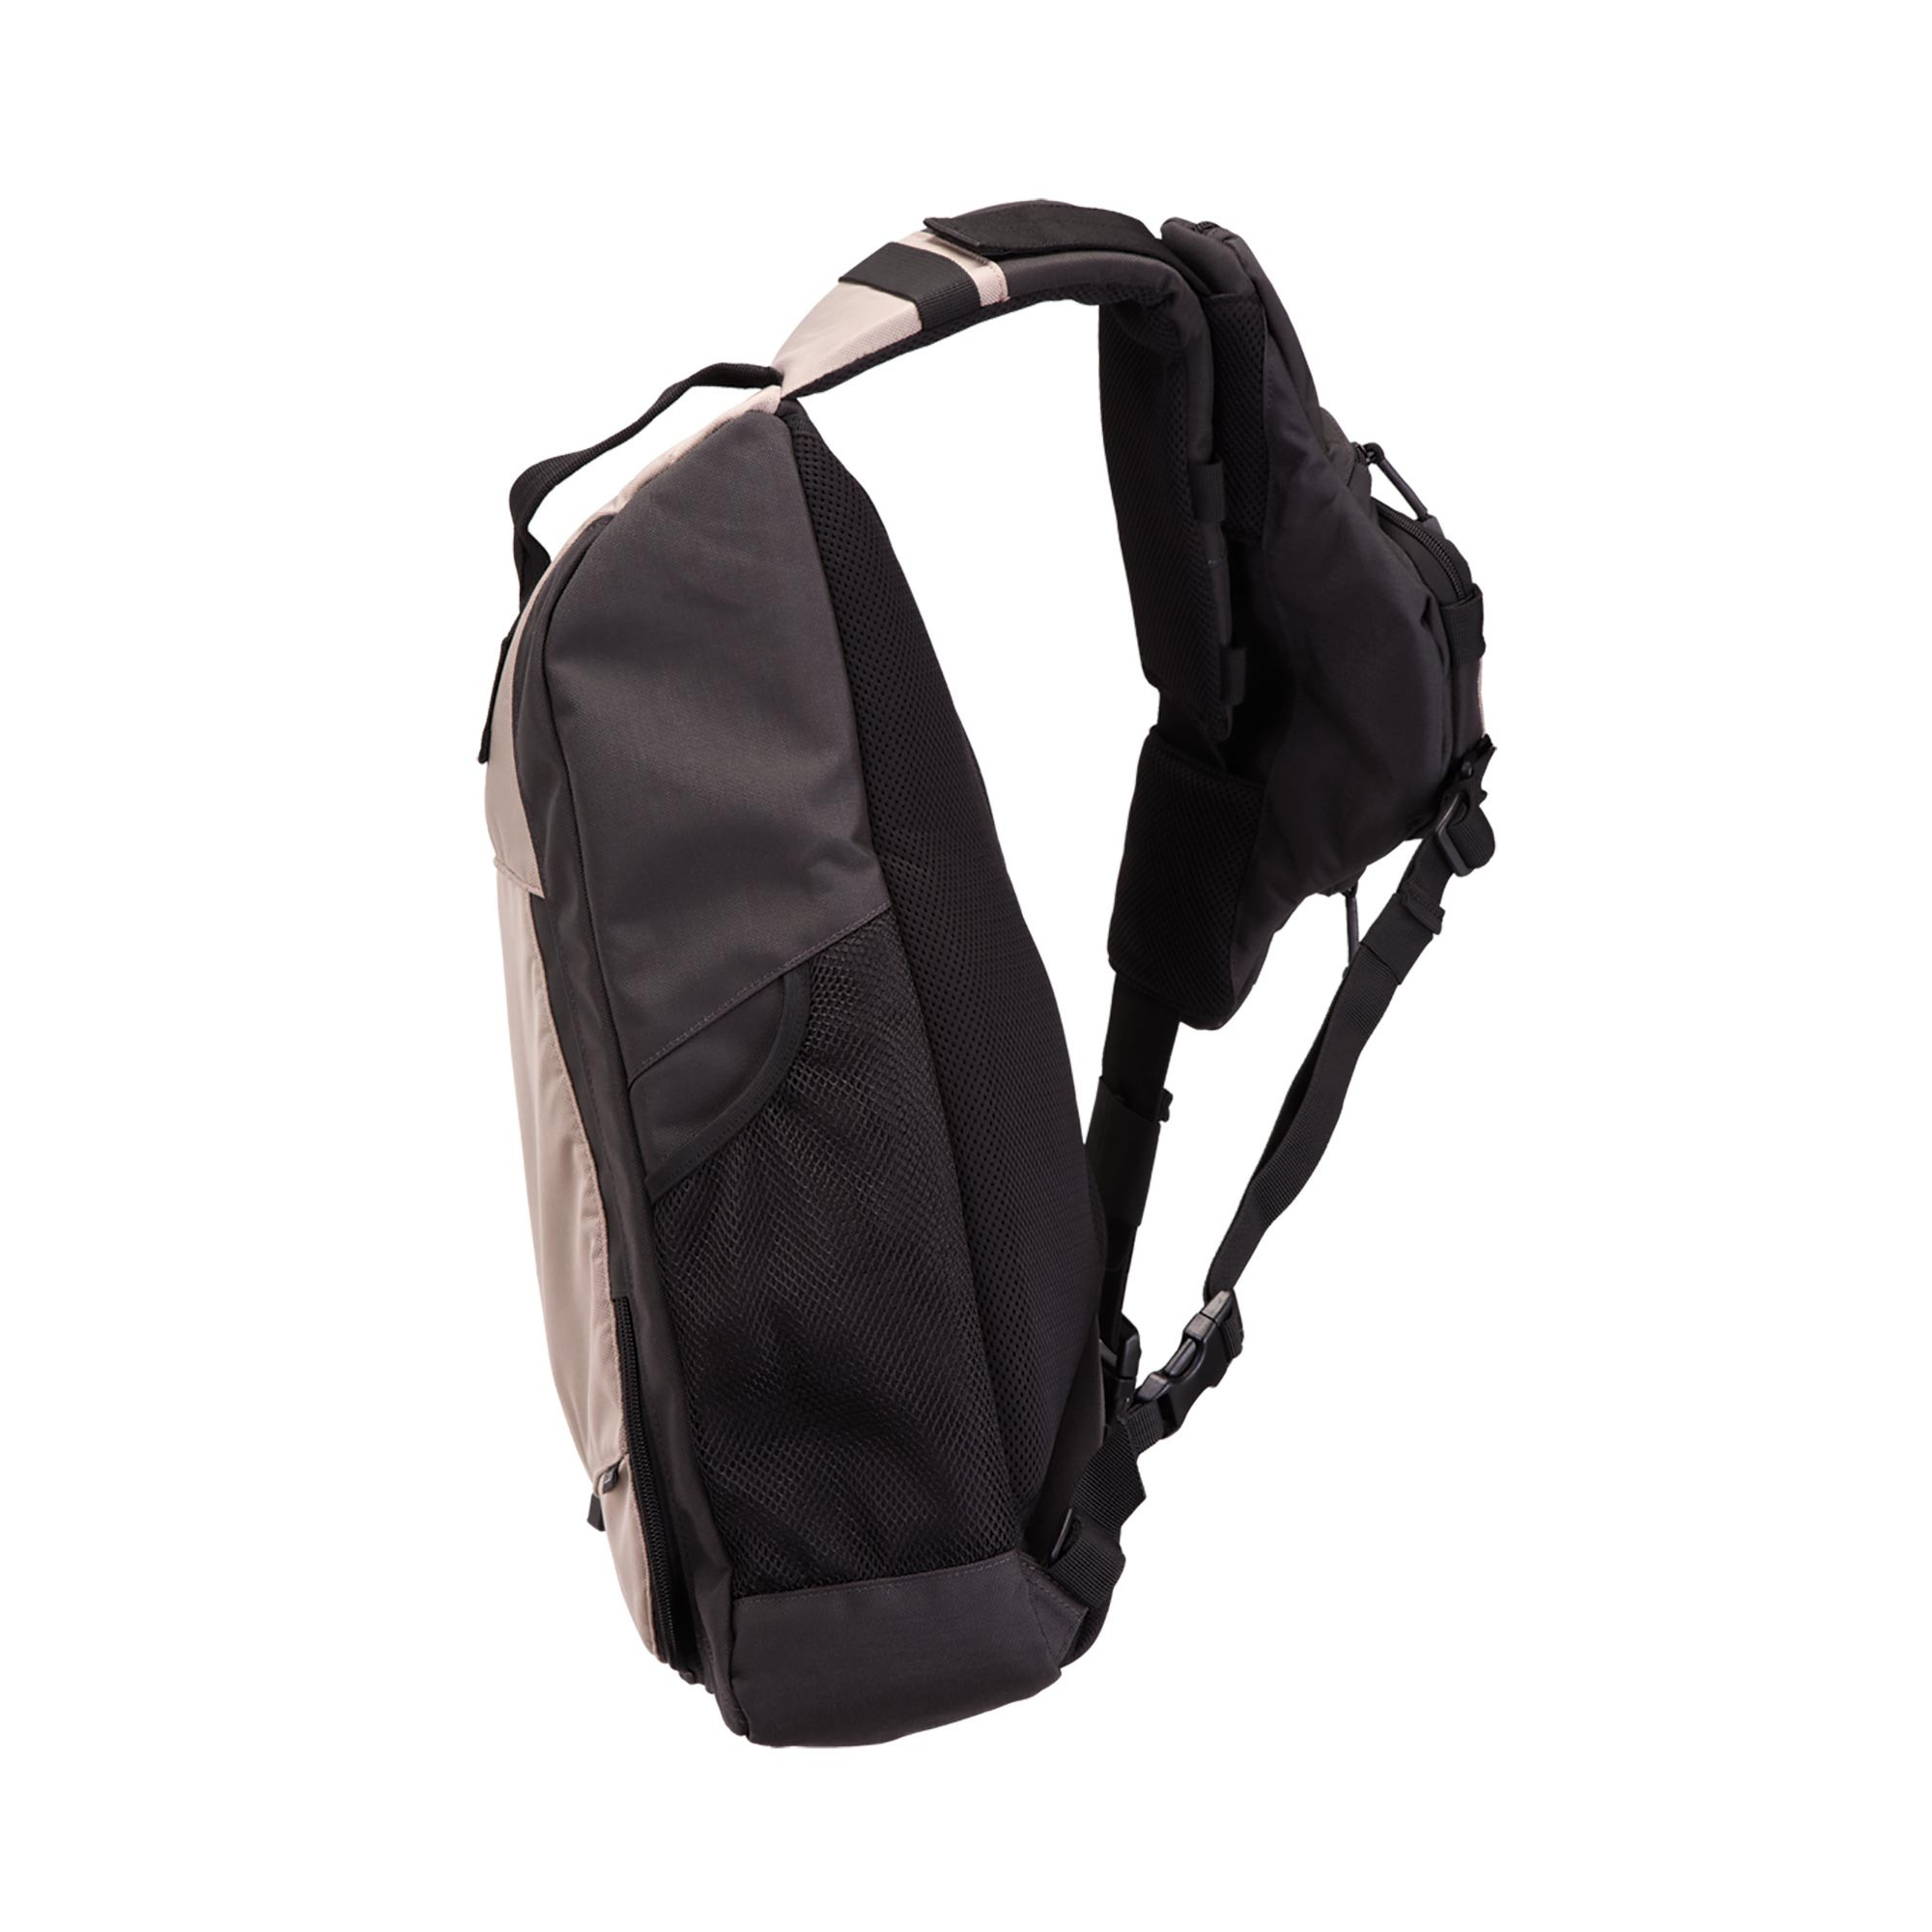 5.11 Tactical Select Carry Sling Pack 58603